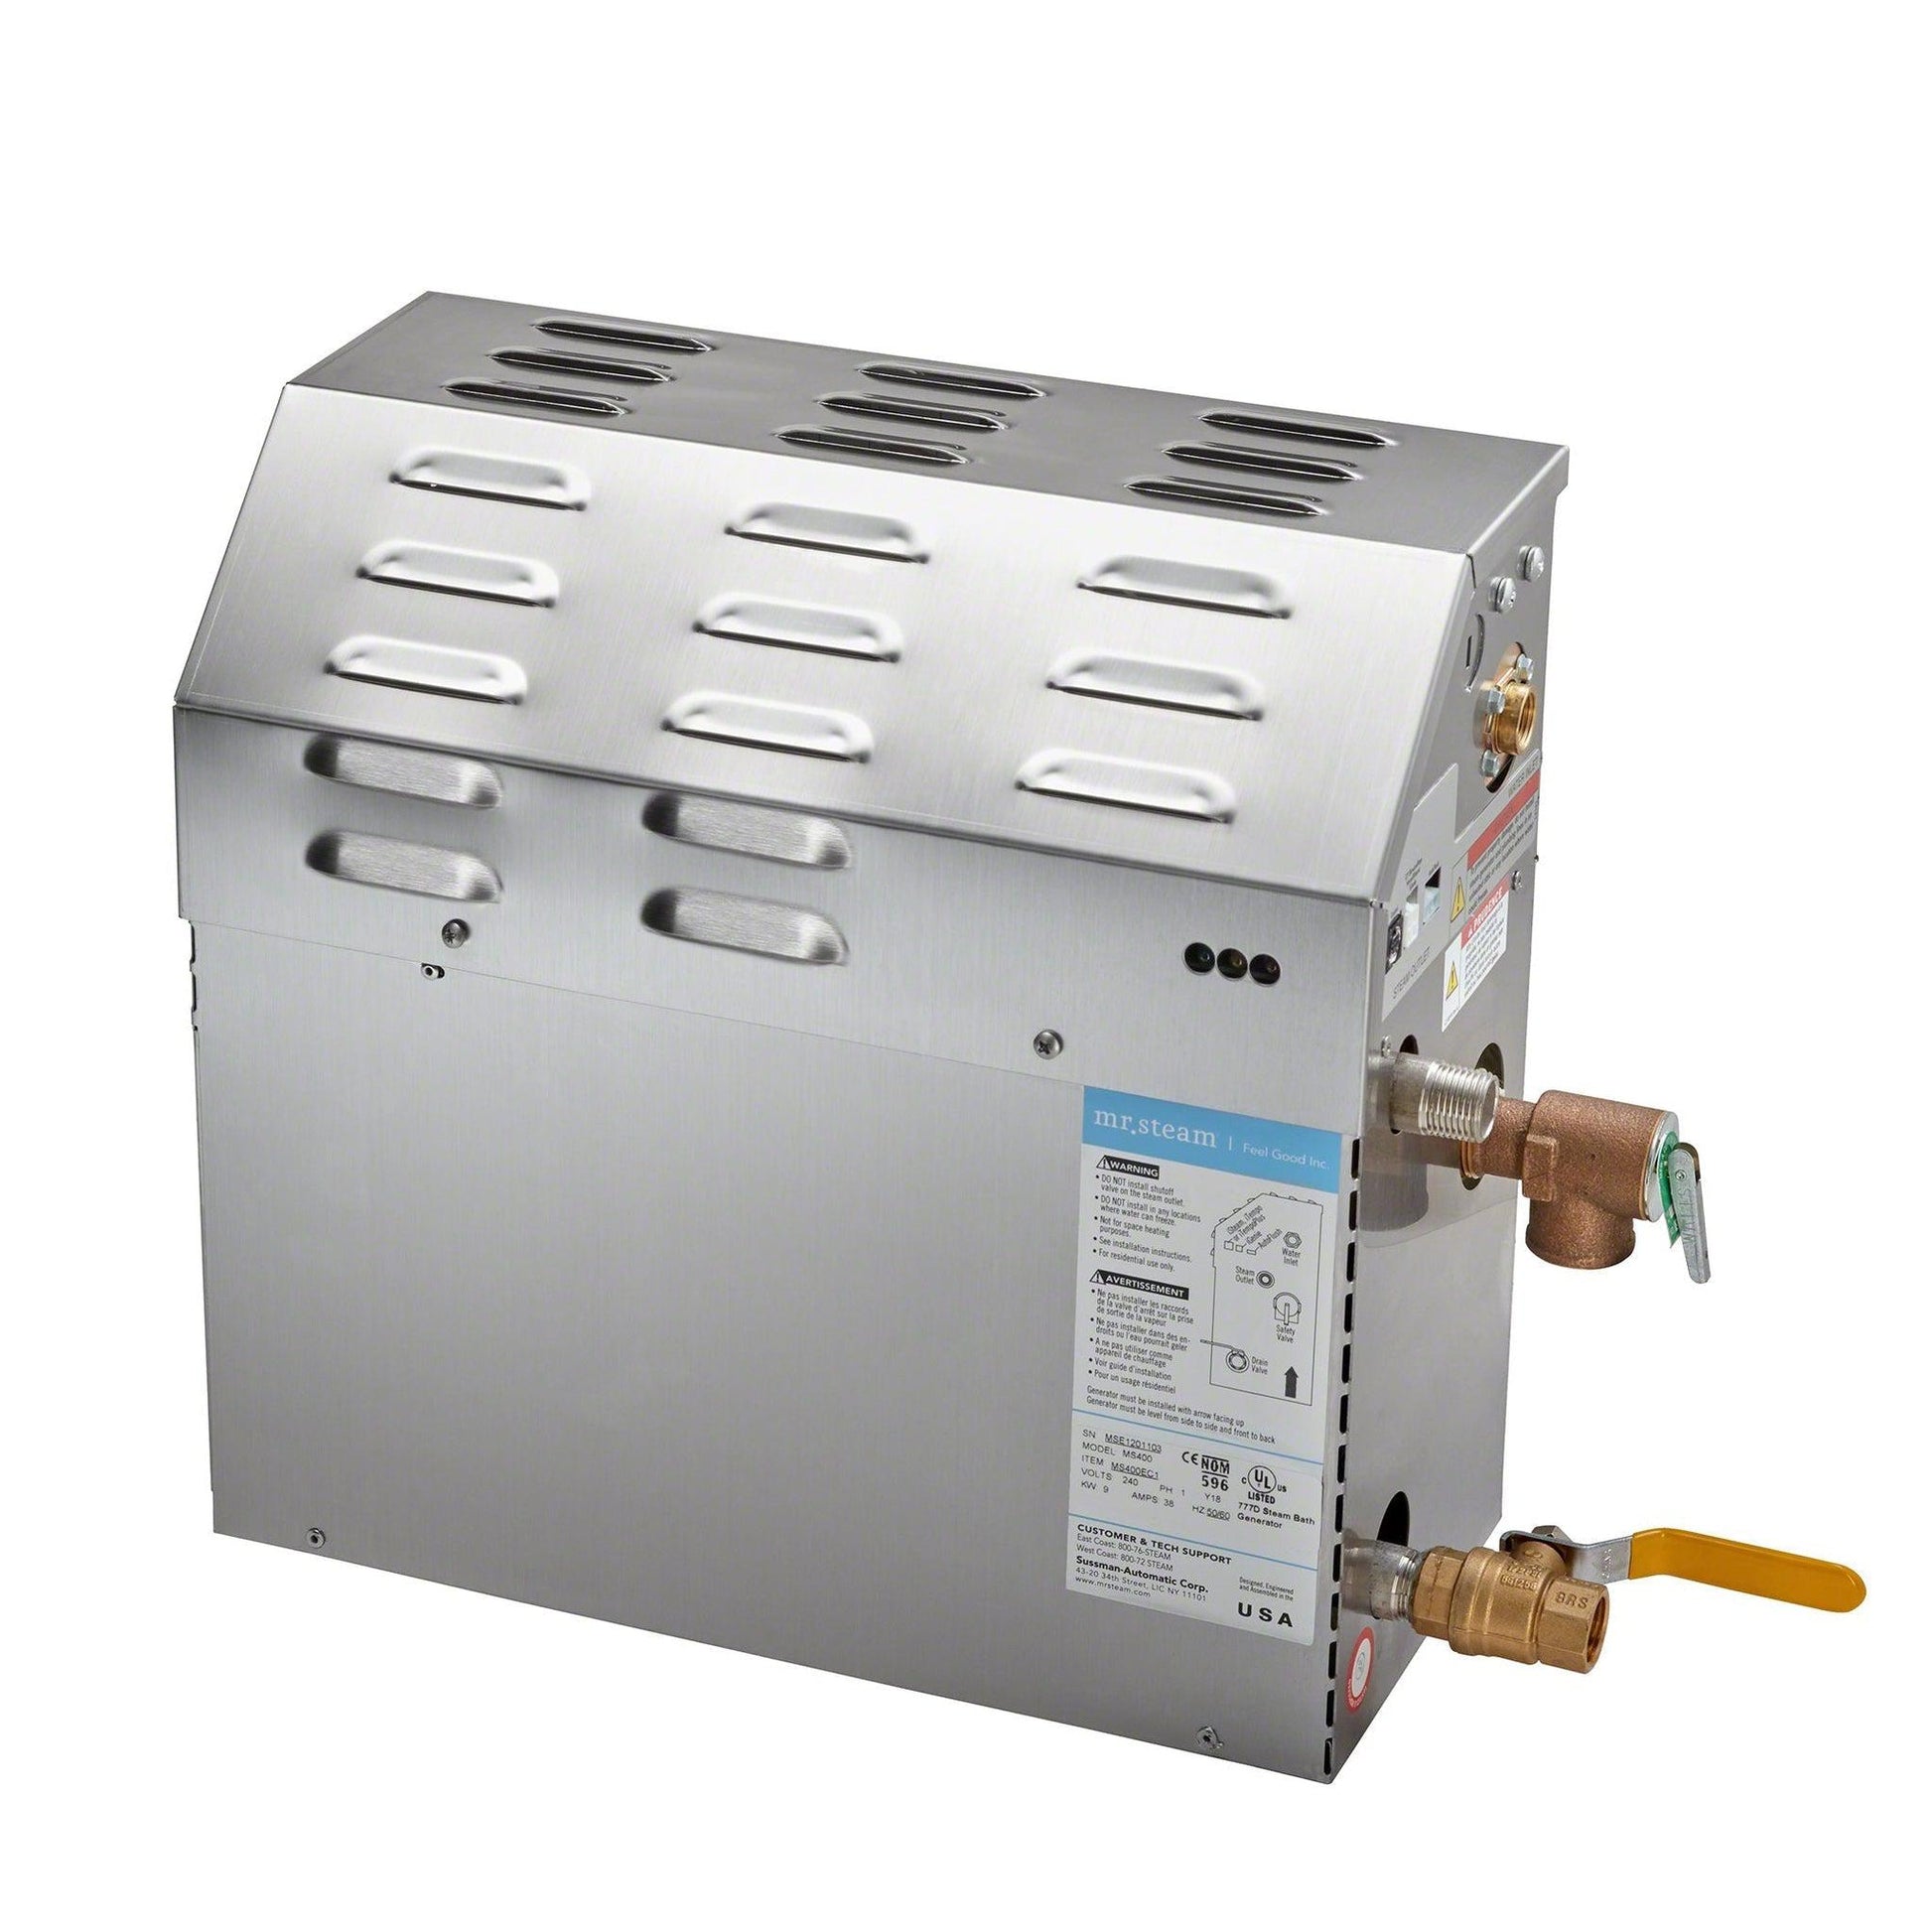 MrSteam e-SERIES MS150EC1 6 kW Steam Generator Incl iTempoPlus Control With Butler Package